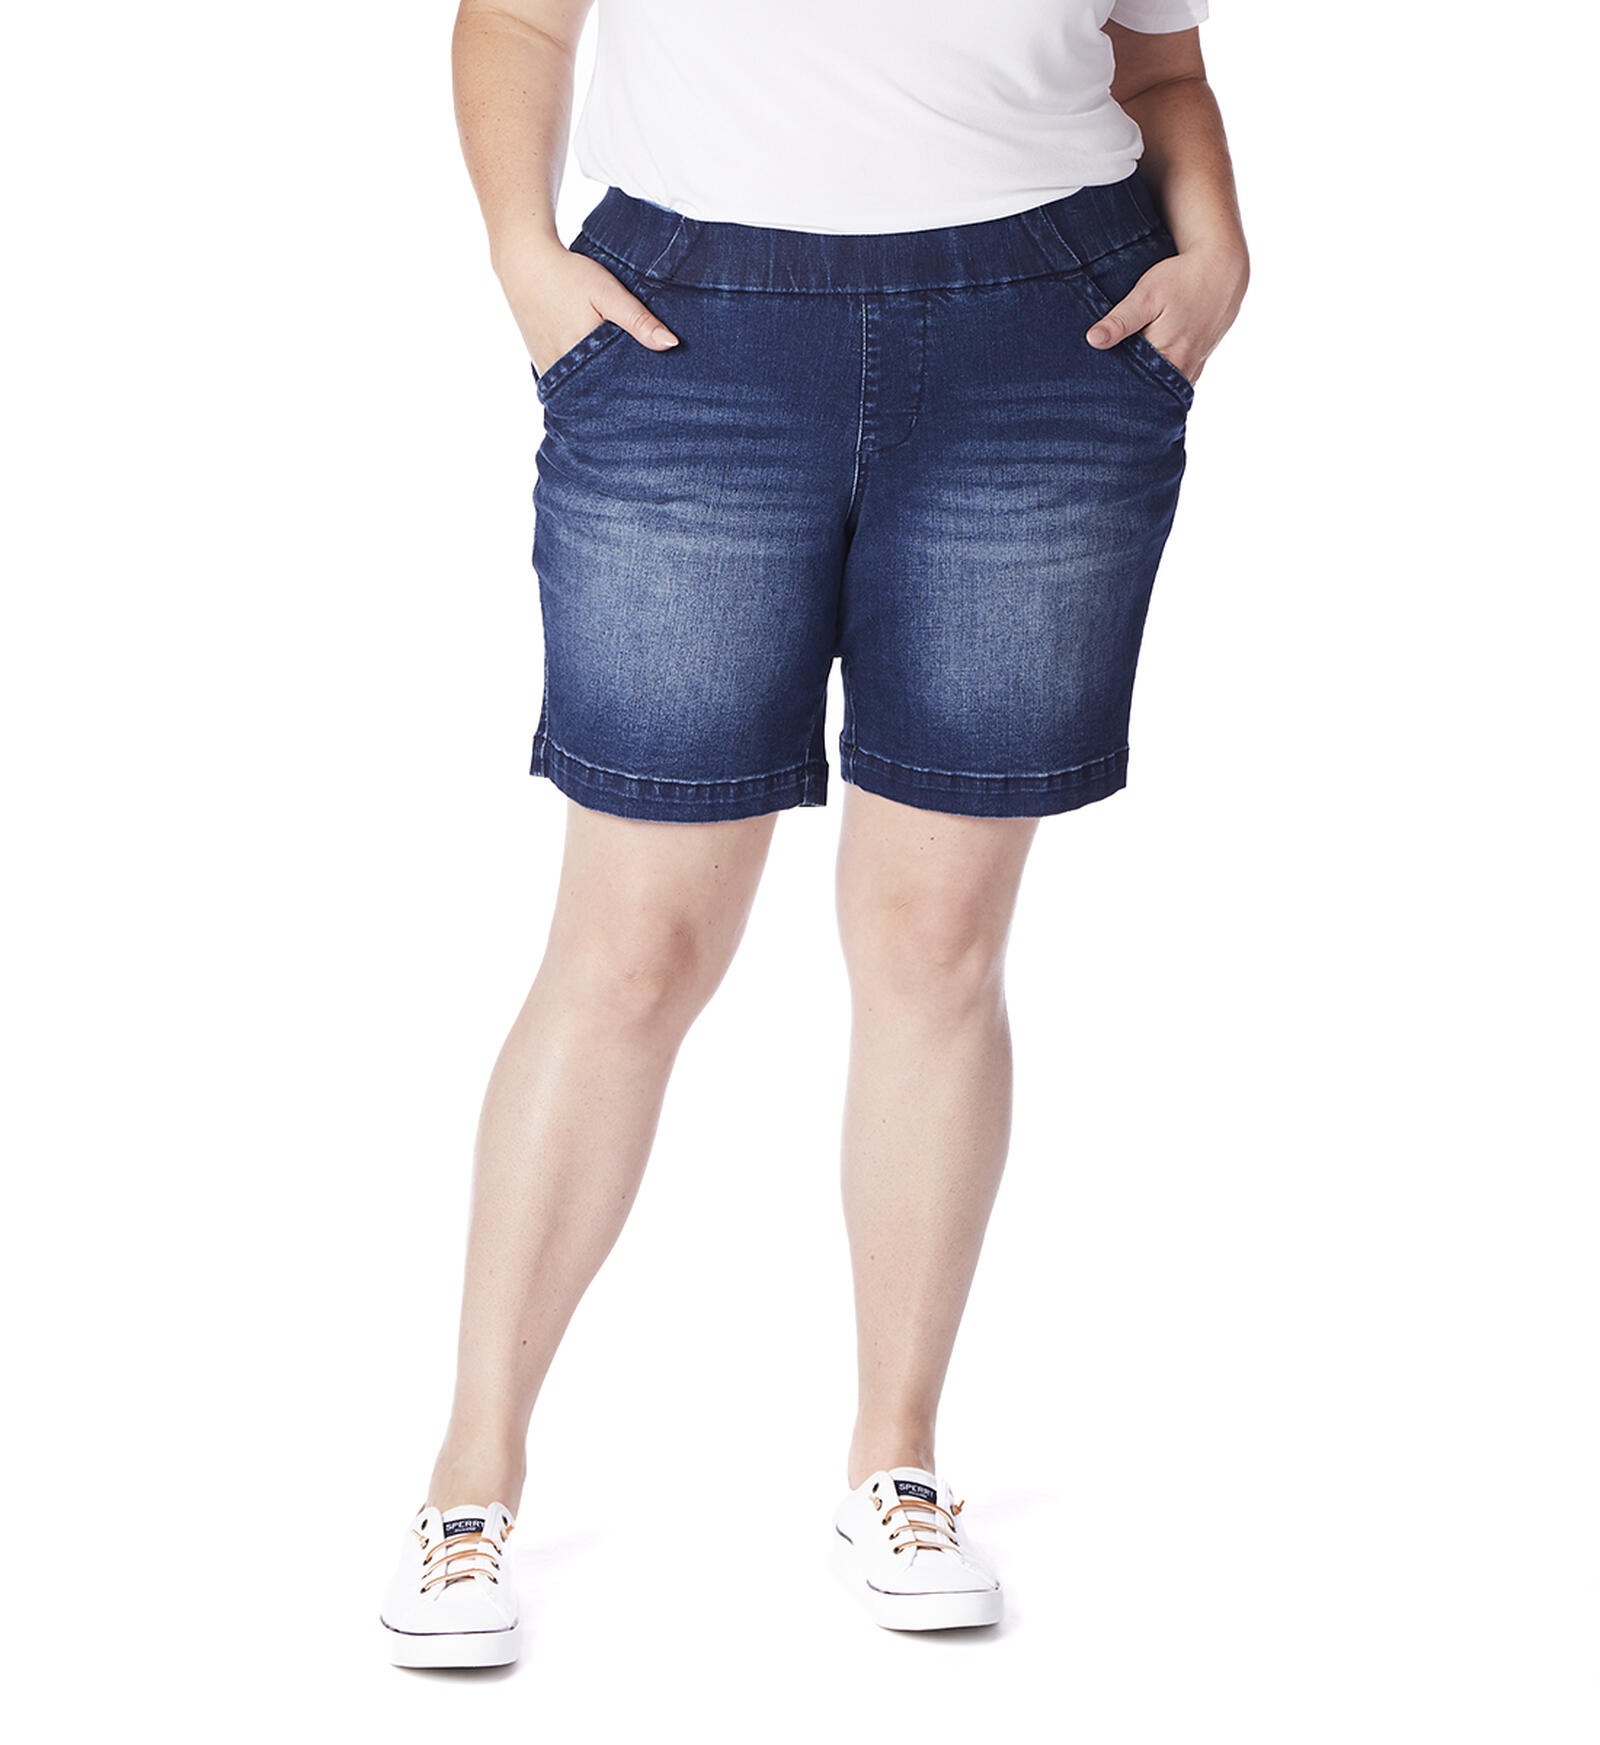 Buy Gracie Mid Rise Short Plus Size for USD 20.00 | Jag Jeans US New